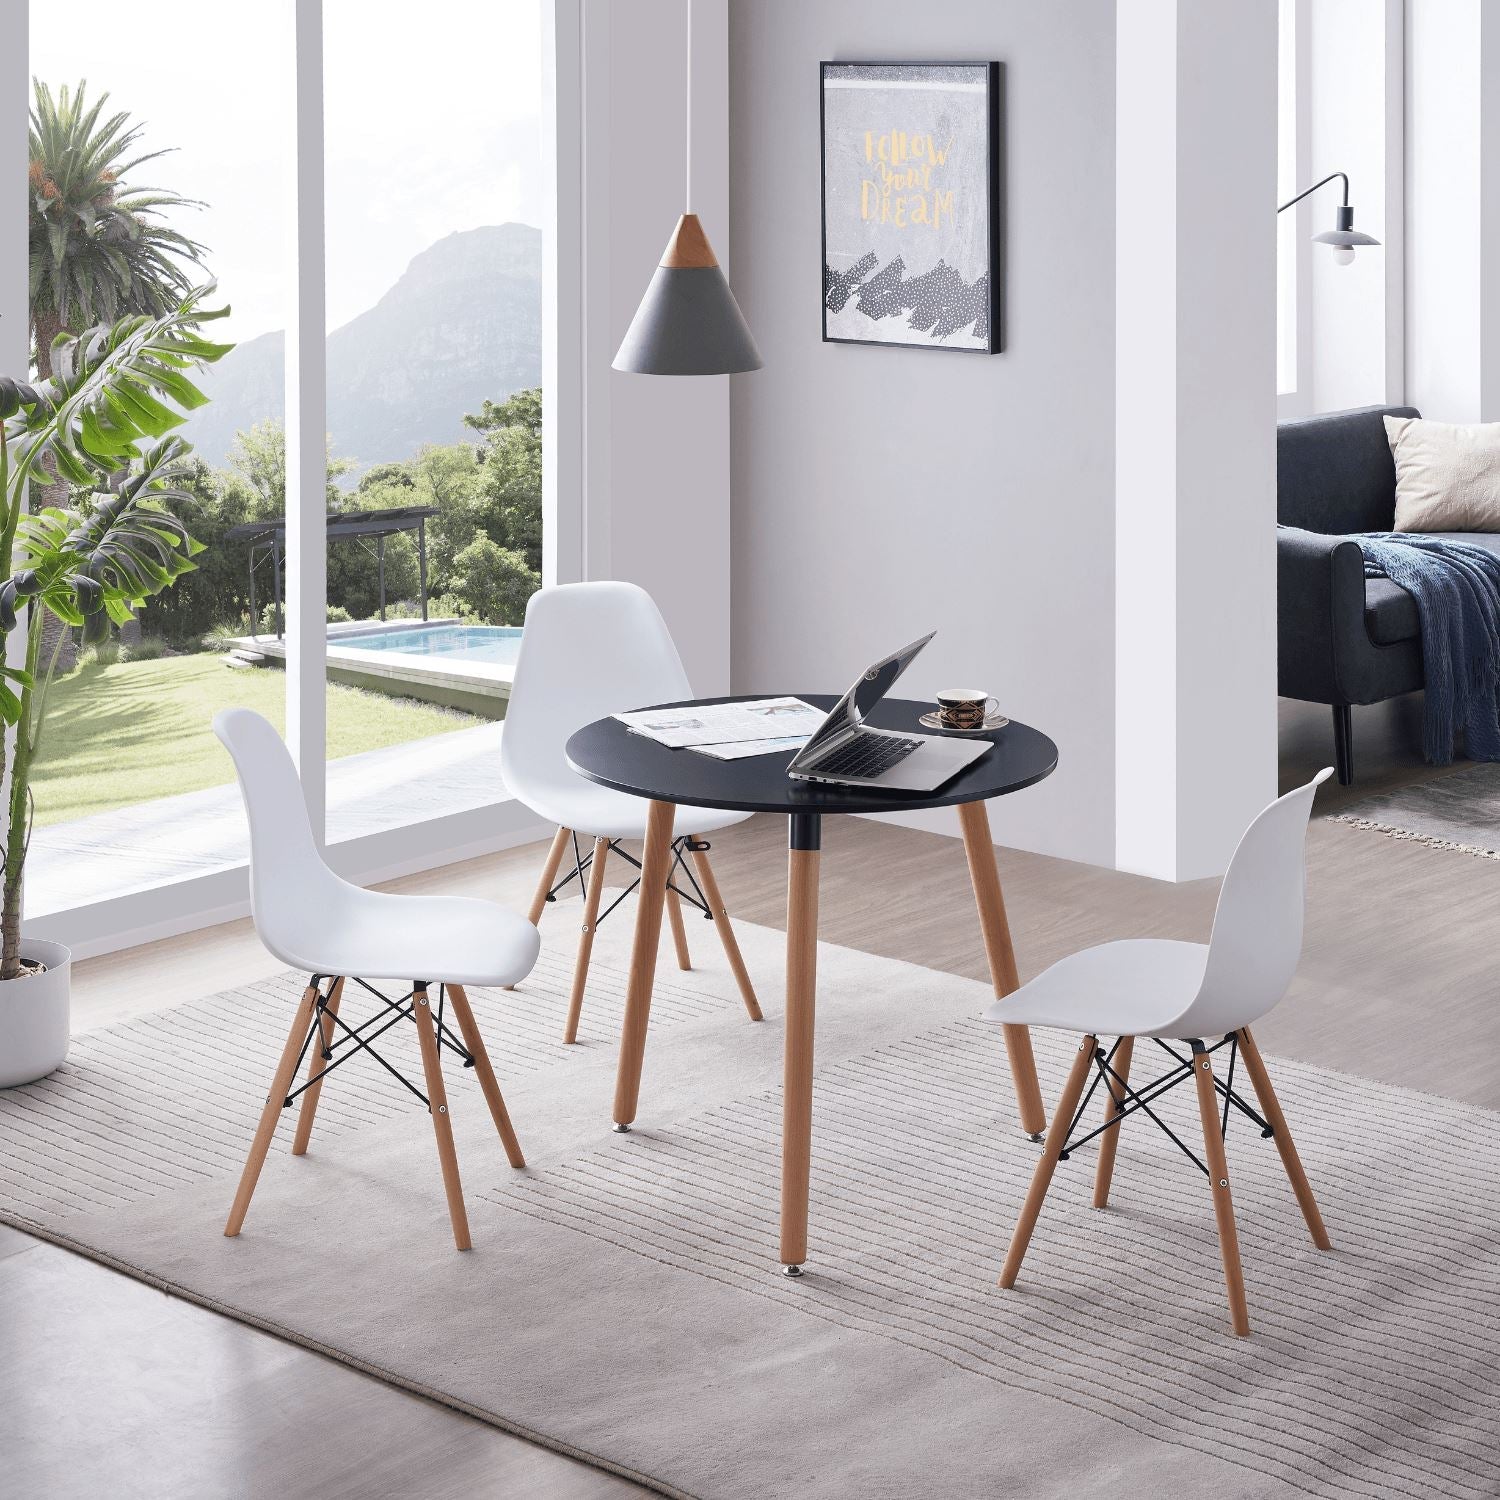 Valmes Valyou Furniture | Table